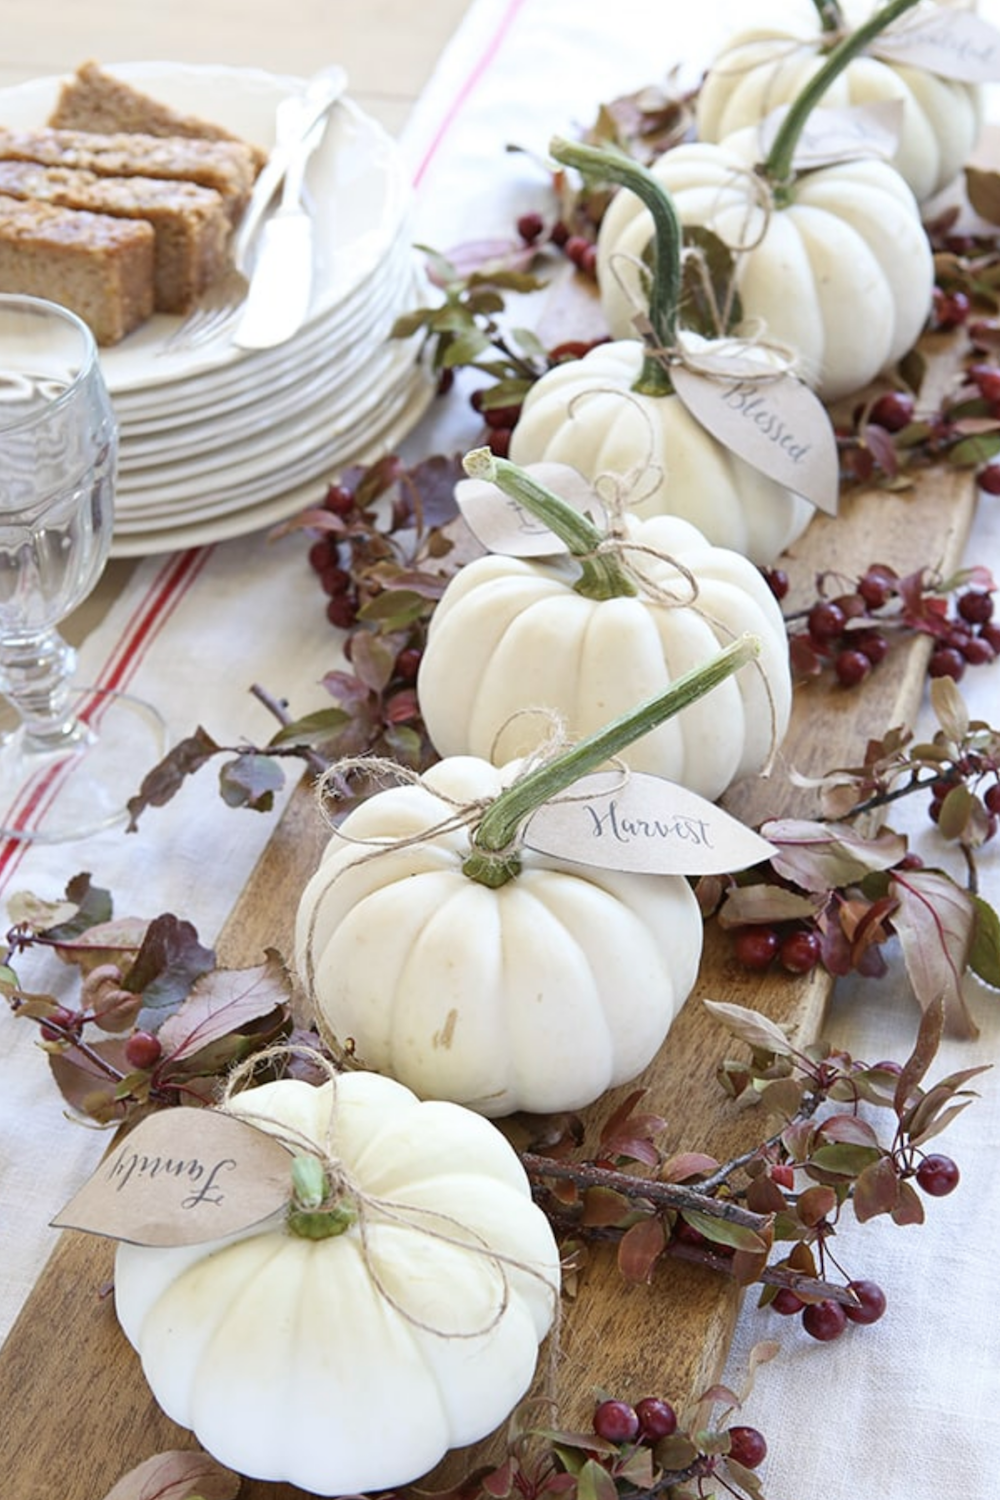 10 Gorgeous Fall Centerpieces That Will Wow Your Guests